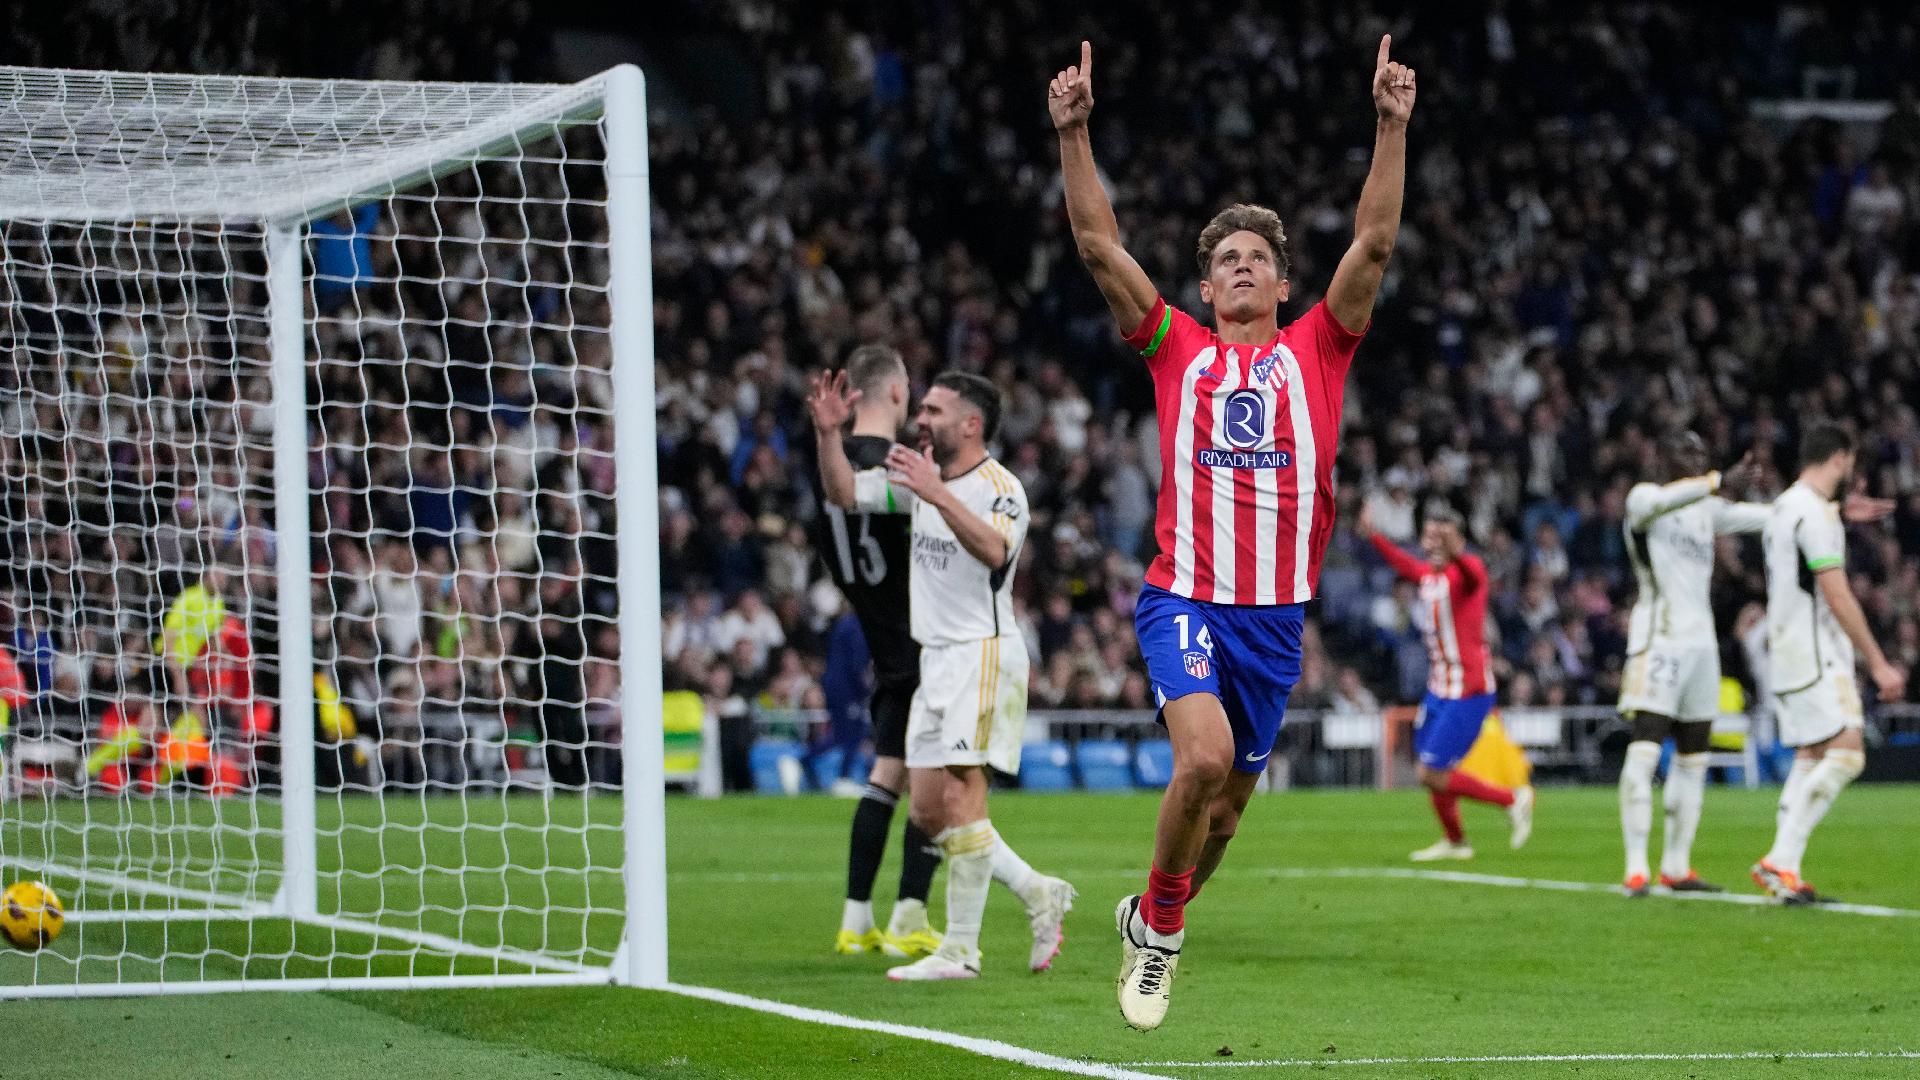 Marcos Llorente’s stoppage-time strike denies Real Madrid derby victory